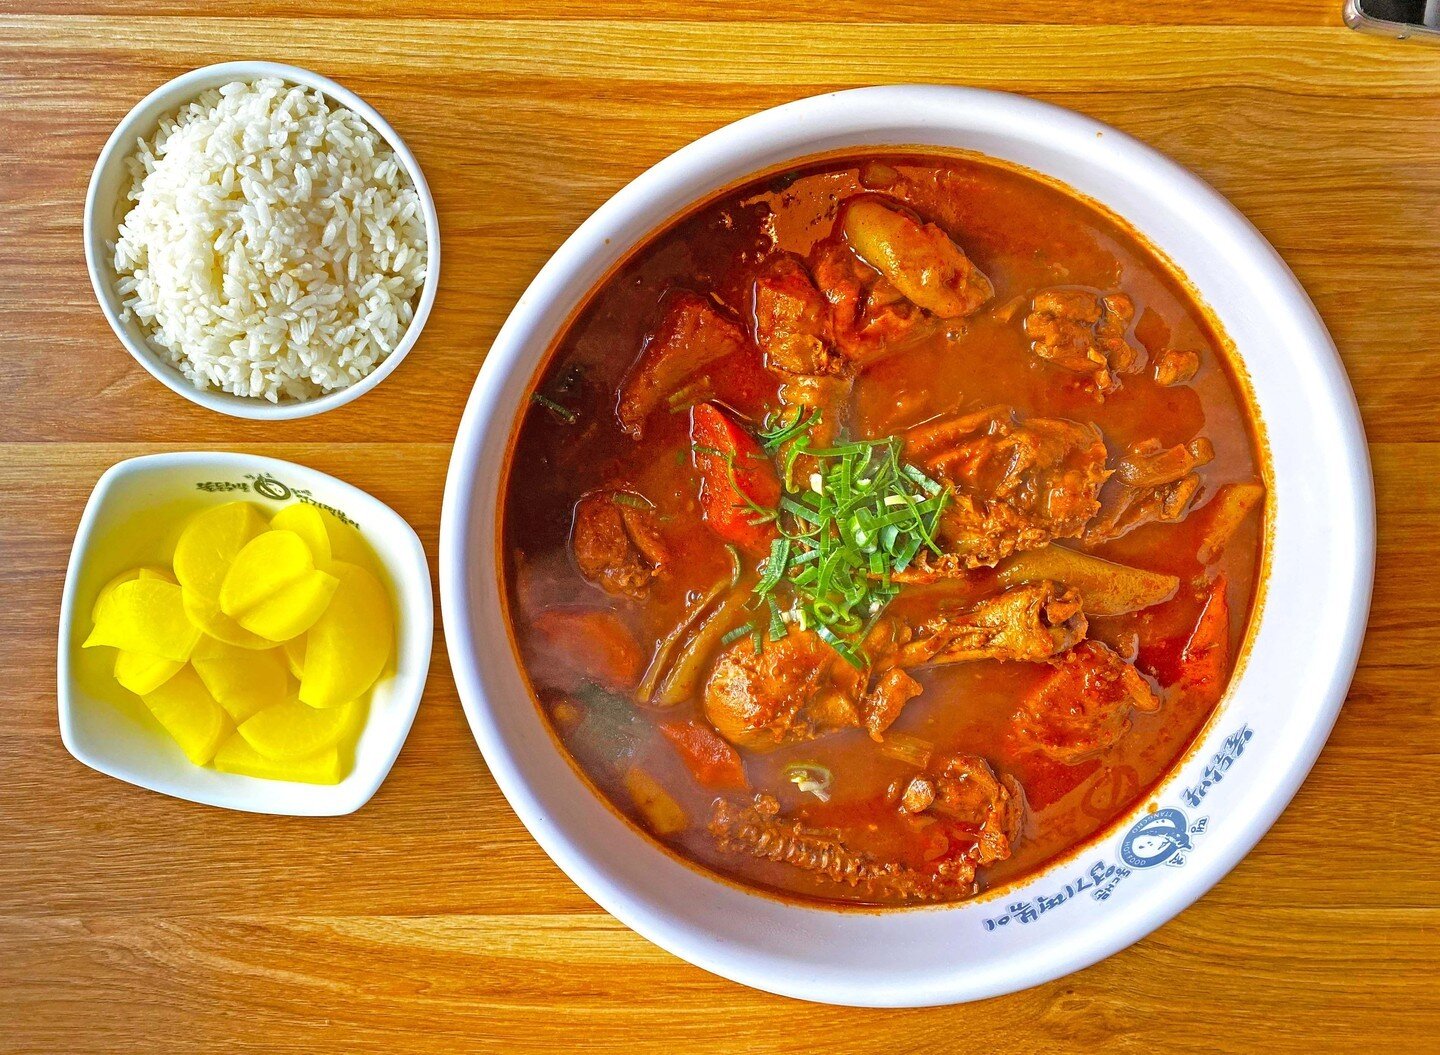 The iconic Korean #comfortfood - Spicy #Chickenstew AKA #dakbokkeumtang #닭볶음탕 😋  All you need is a bowl of rice to make it a perfect meal 🍚